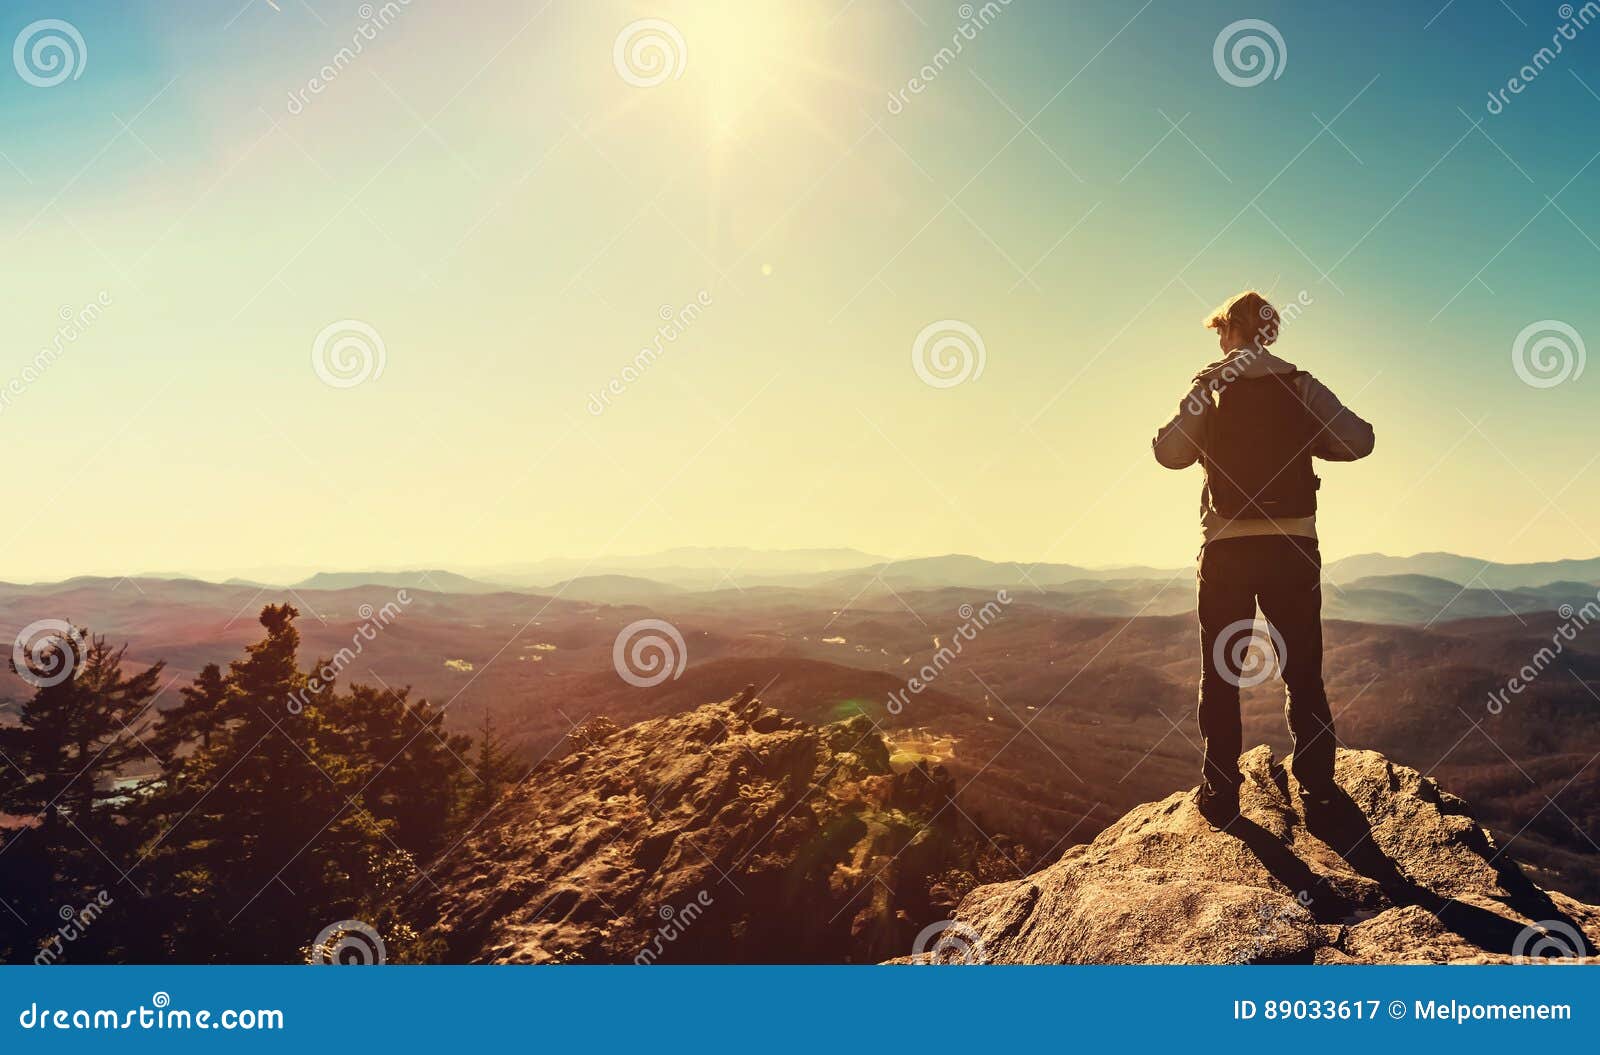 man standing at the edge of a cliff overlooking the mountains